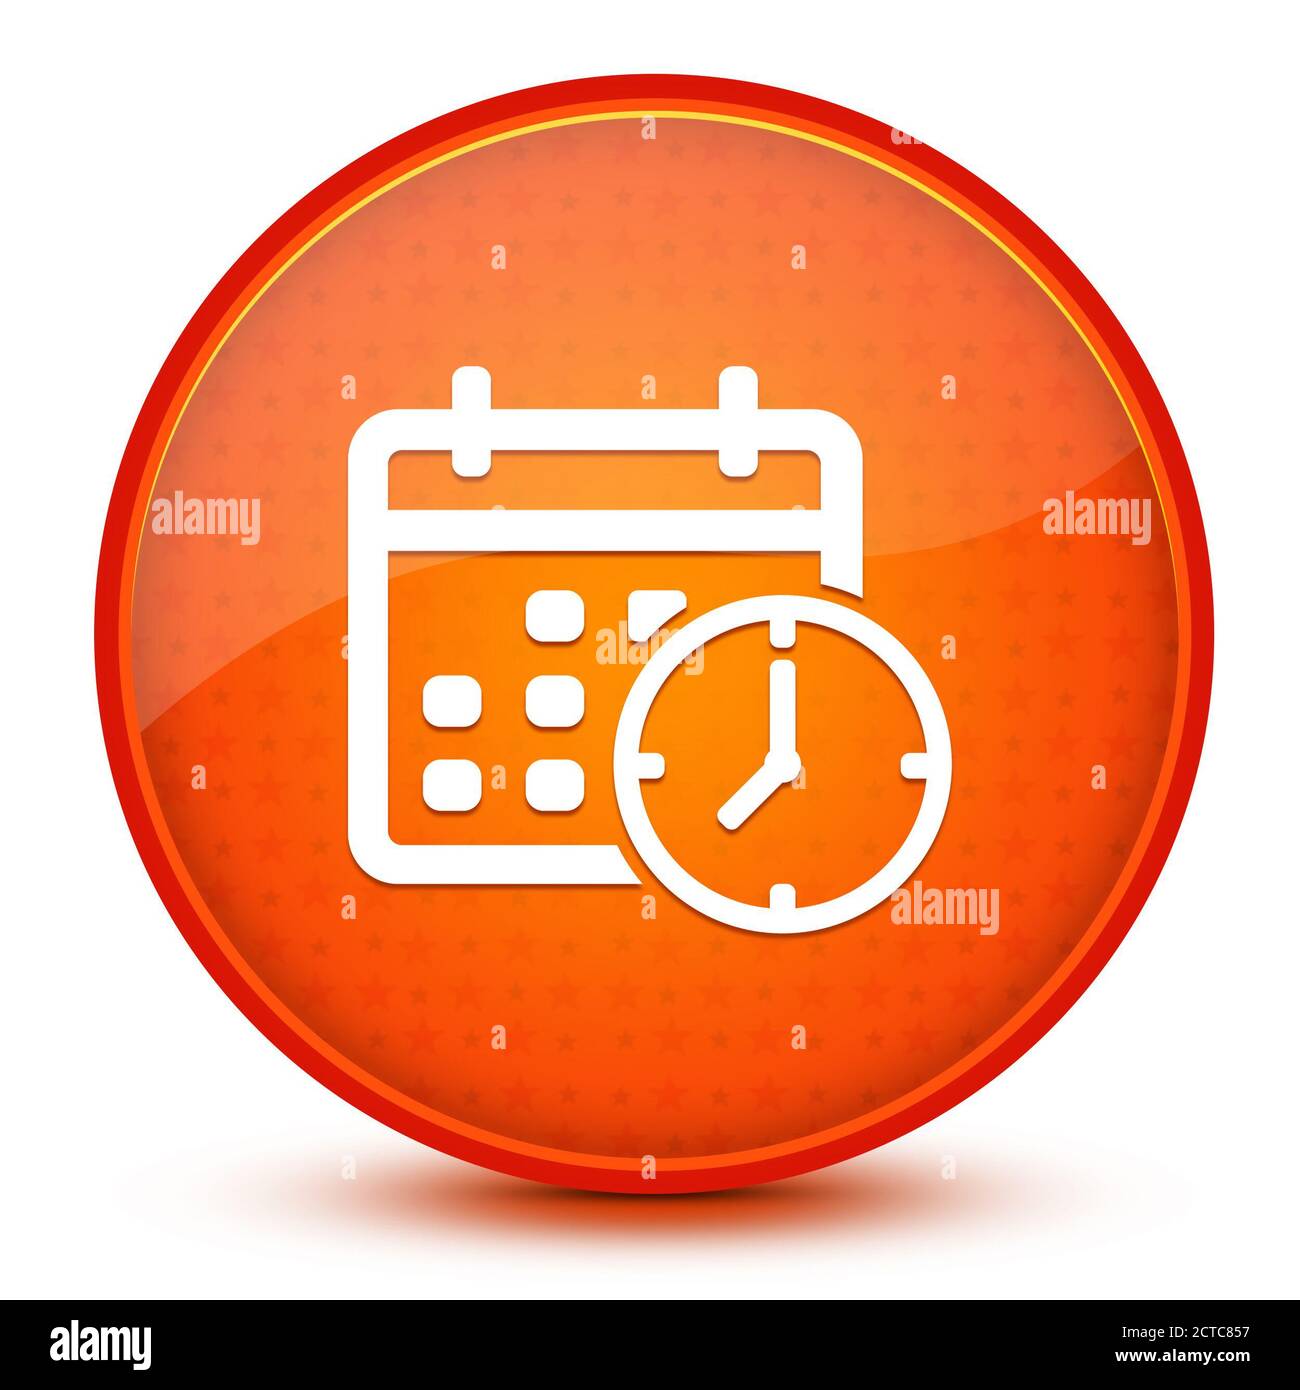 Appointment date calendar aesthetic glossy orange round button abstract illustration Stock Photo